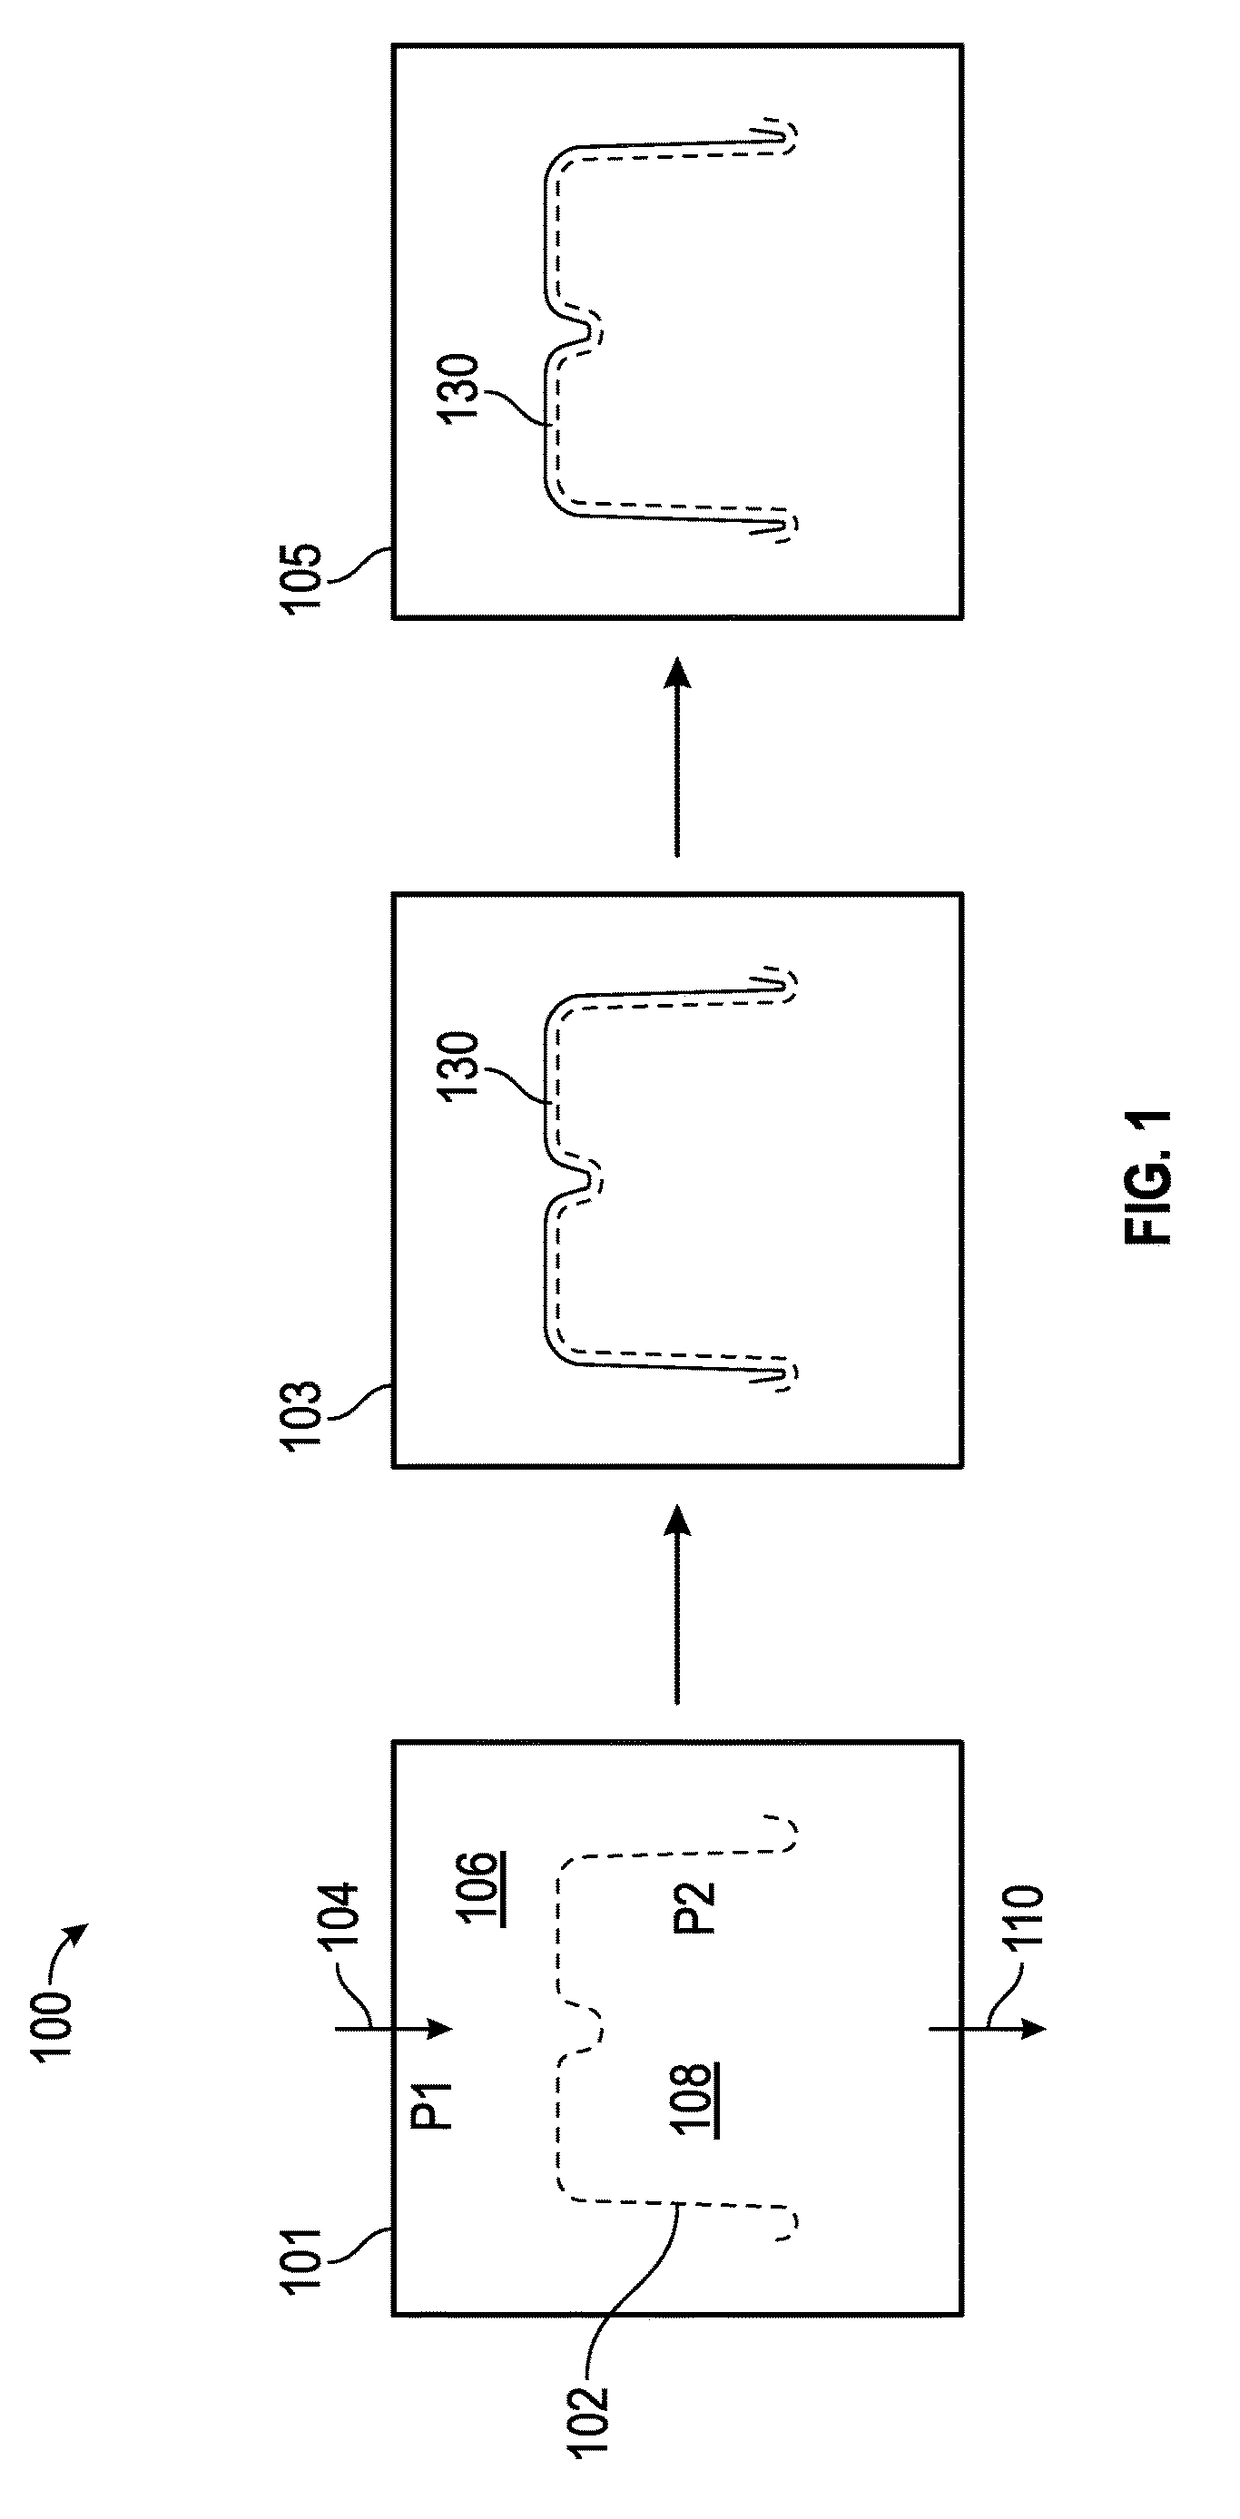 Method for manufacturing fiber-based produced containers